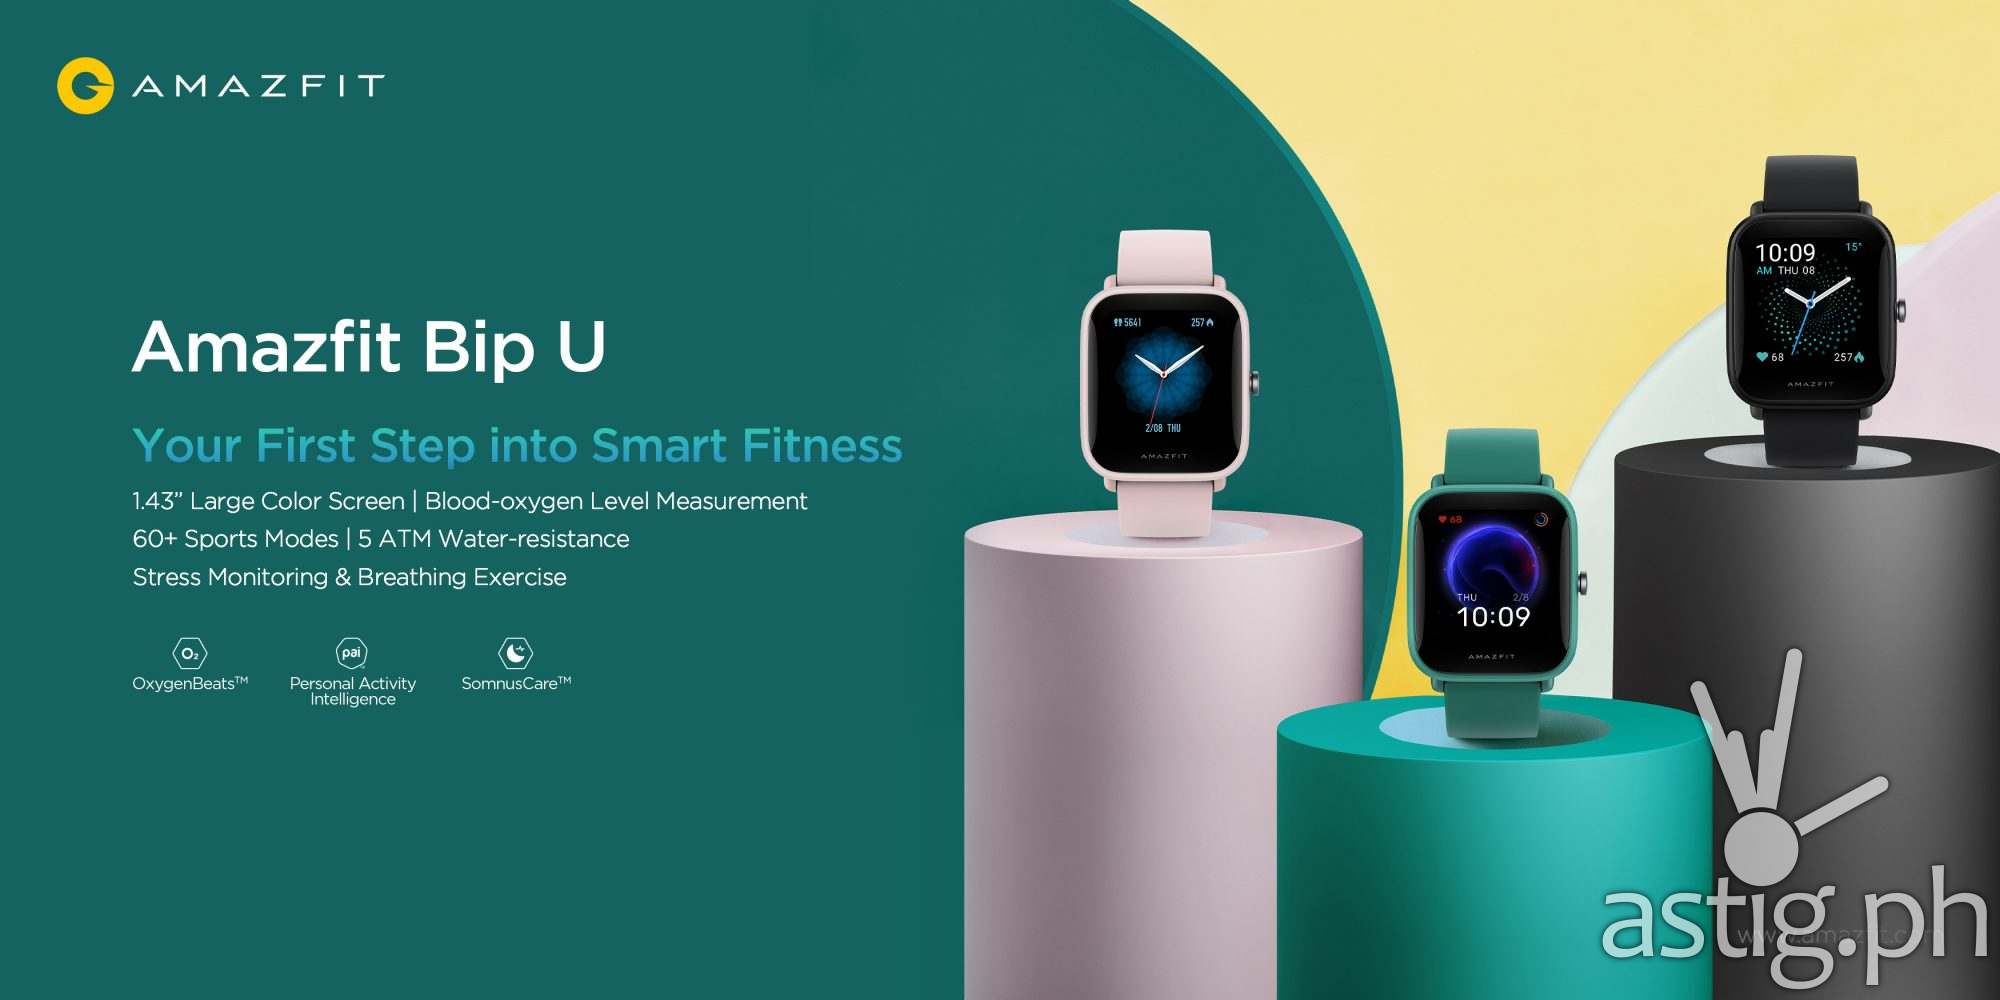 Step into smart fitness with Amazfit Bip U, to launch exclusively on Shopee starting November 23